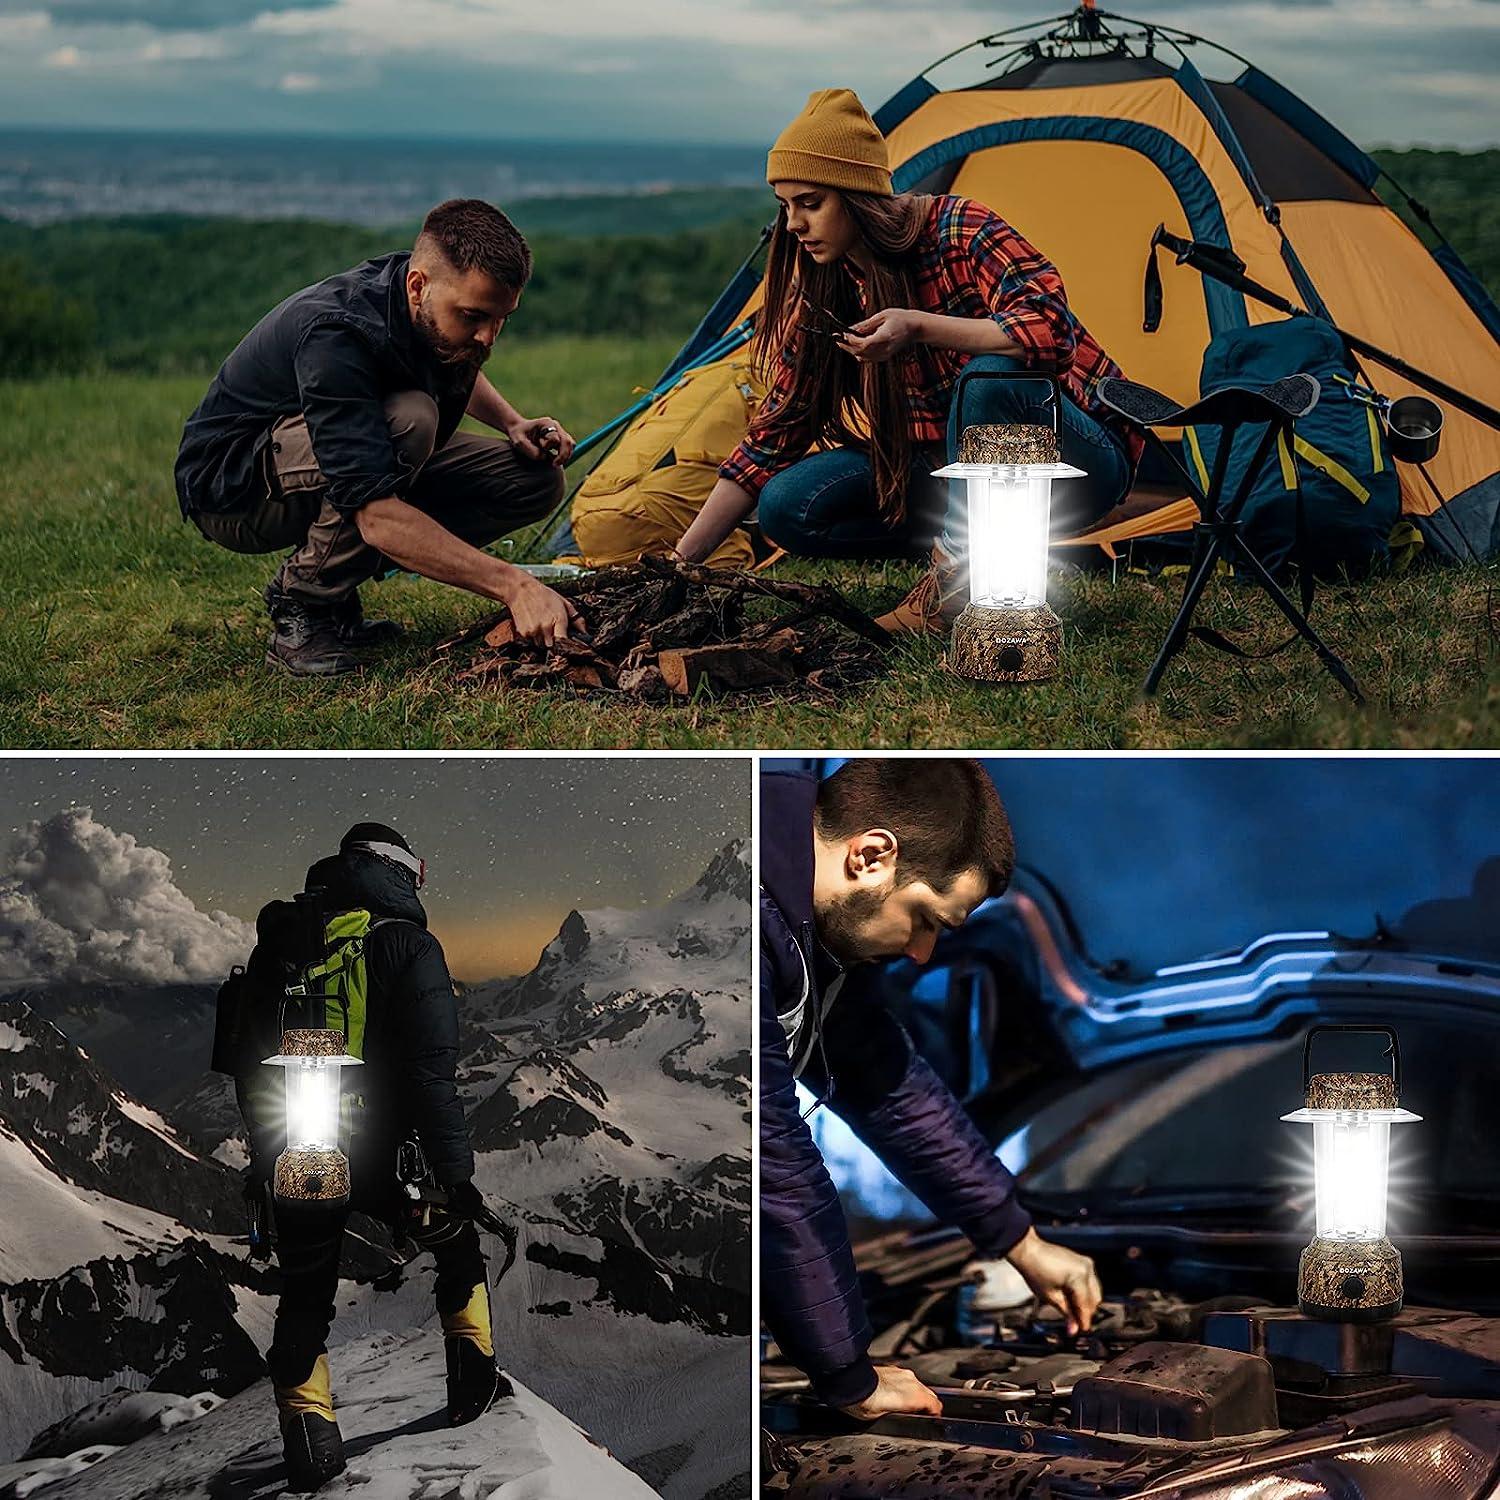 DOZAWA LED Camping Lantern, 2000LM Battery Powered Camping Lights, Super  Bright Emergency Light with Hook, 5 Lighting Modes, IPX4 Waterproof, Camping  Gear, Survival Kits for Hurricane, Hiking, Fishing Battery-Camo